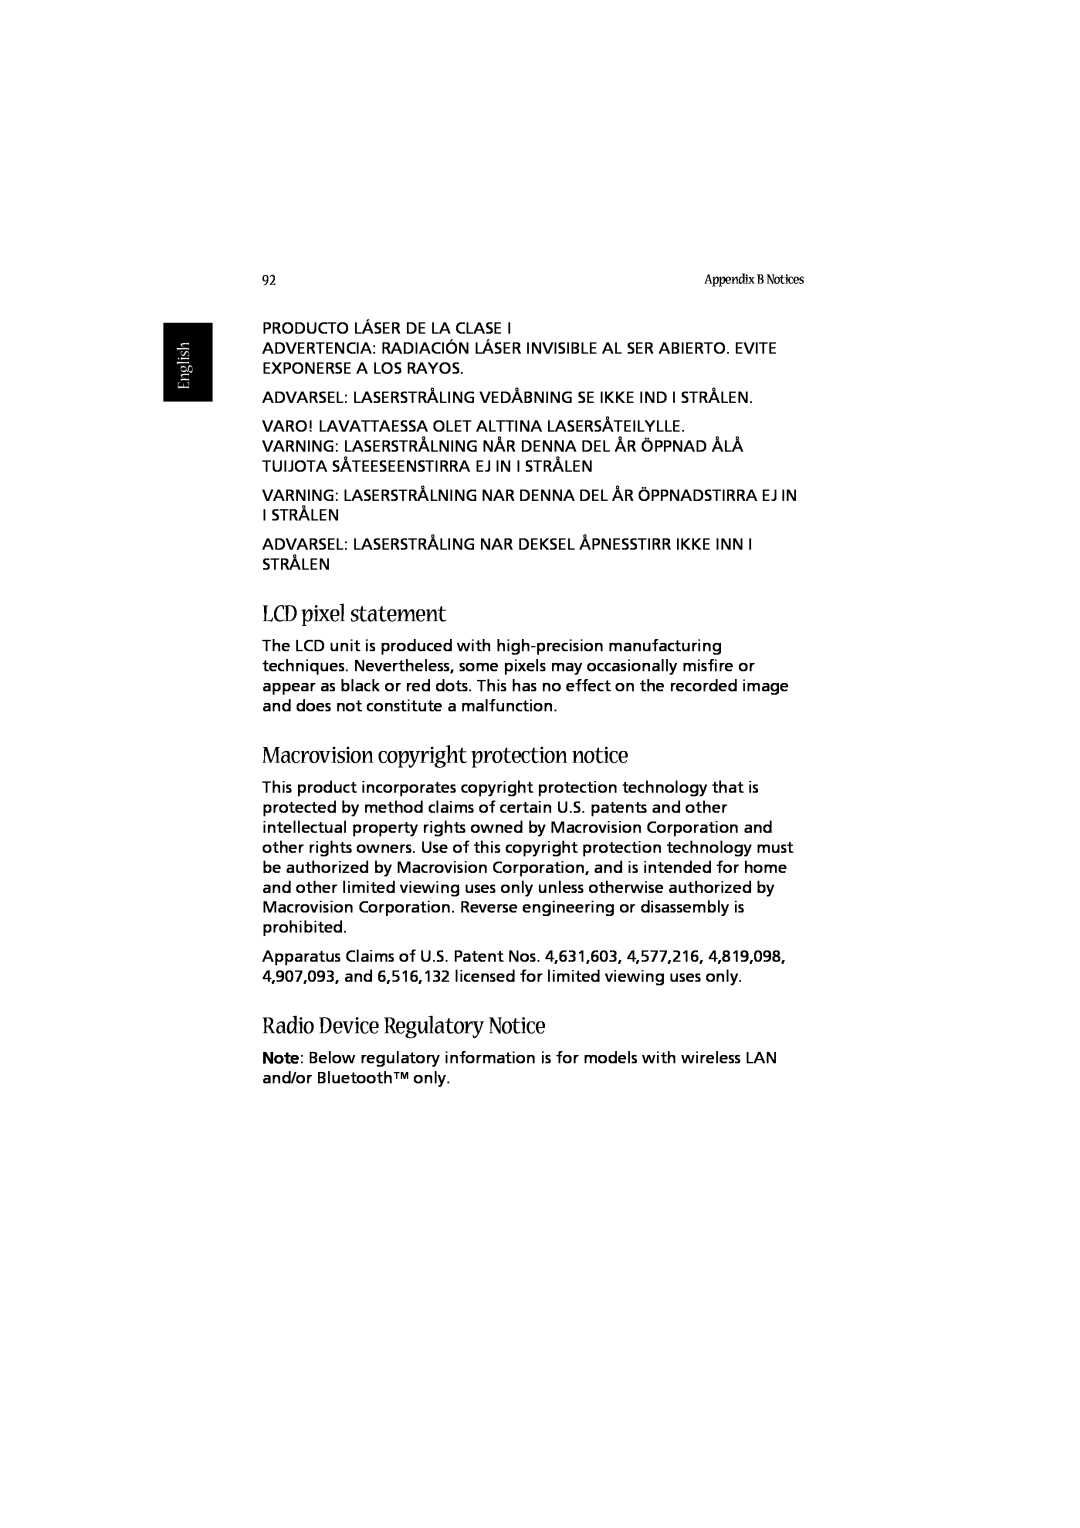 Acer 2010 manual LCD pixel statement, Macrovision copyright protection notice, Radio Device Regulatory Notice, English 